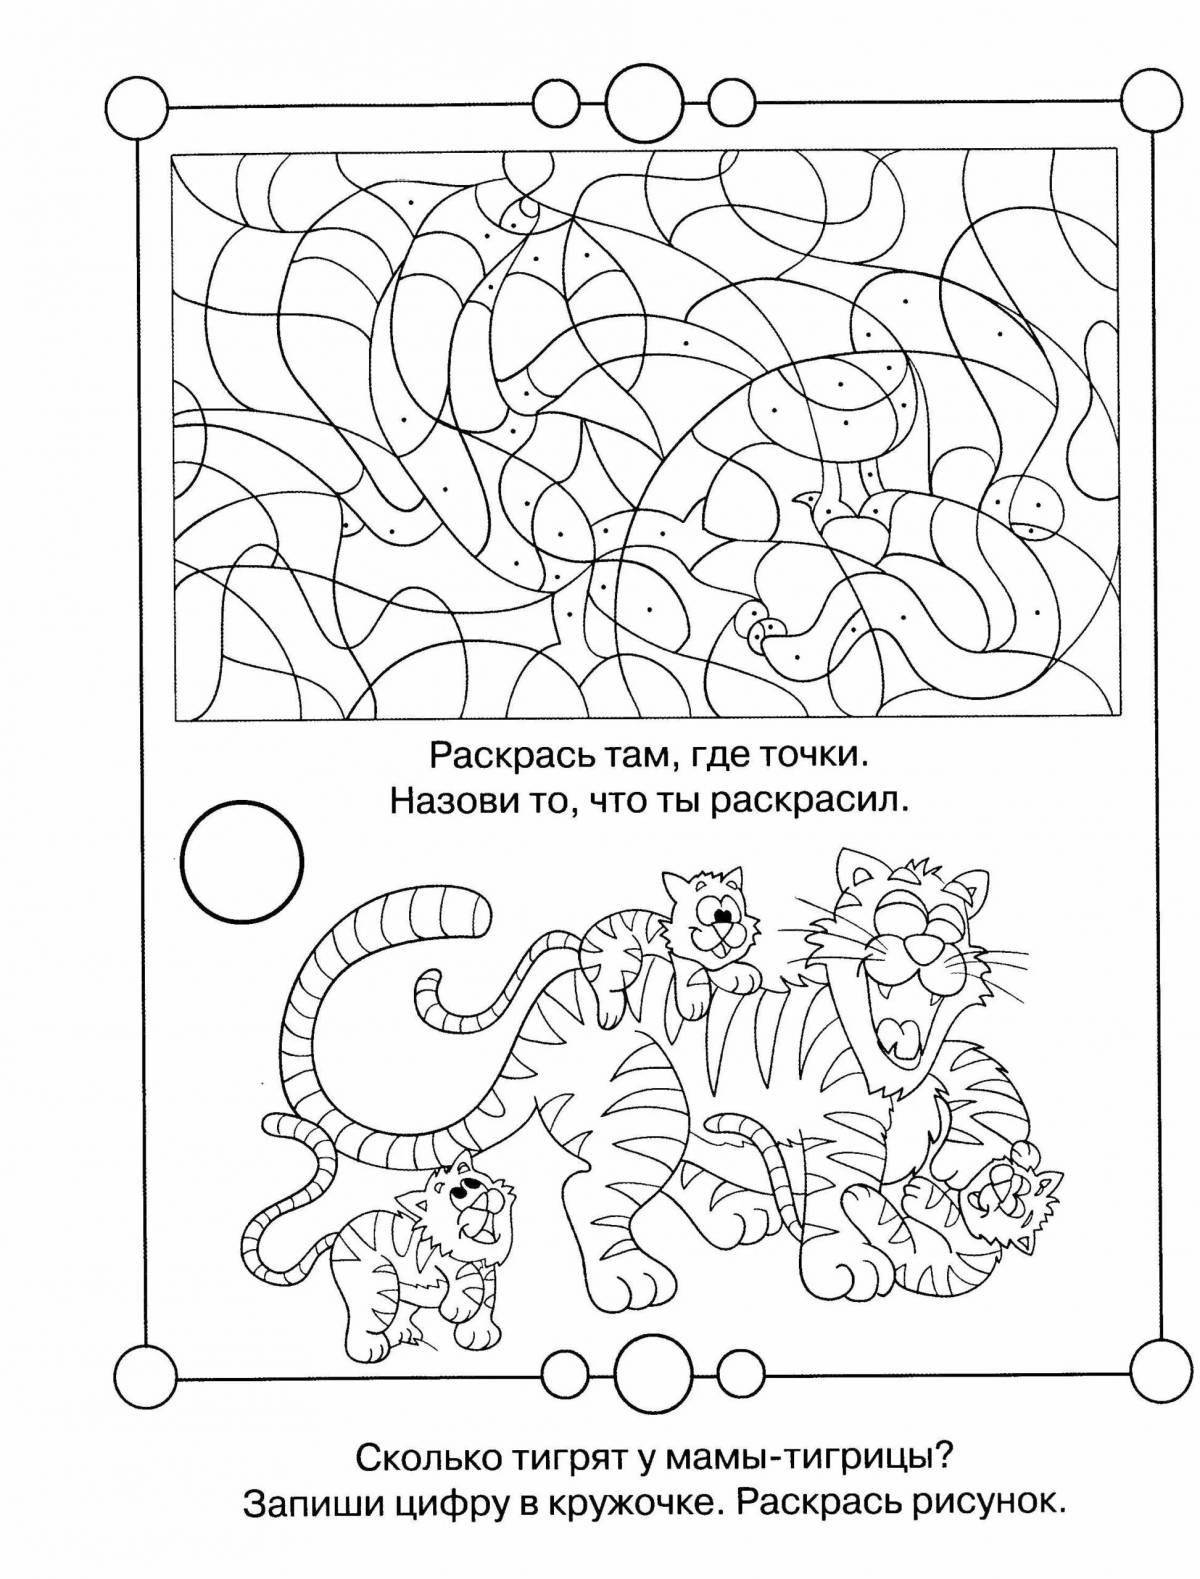 A fascinating logical coloring book for children for 5 years